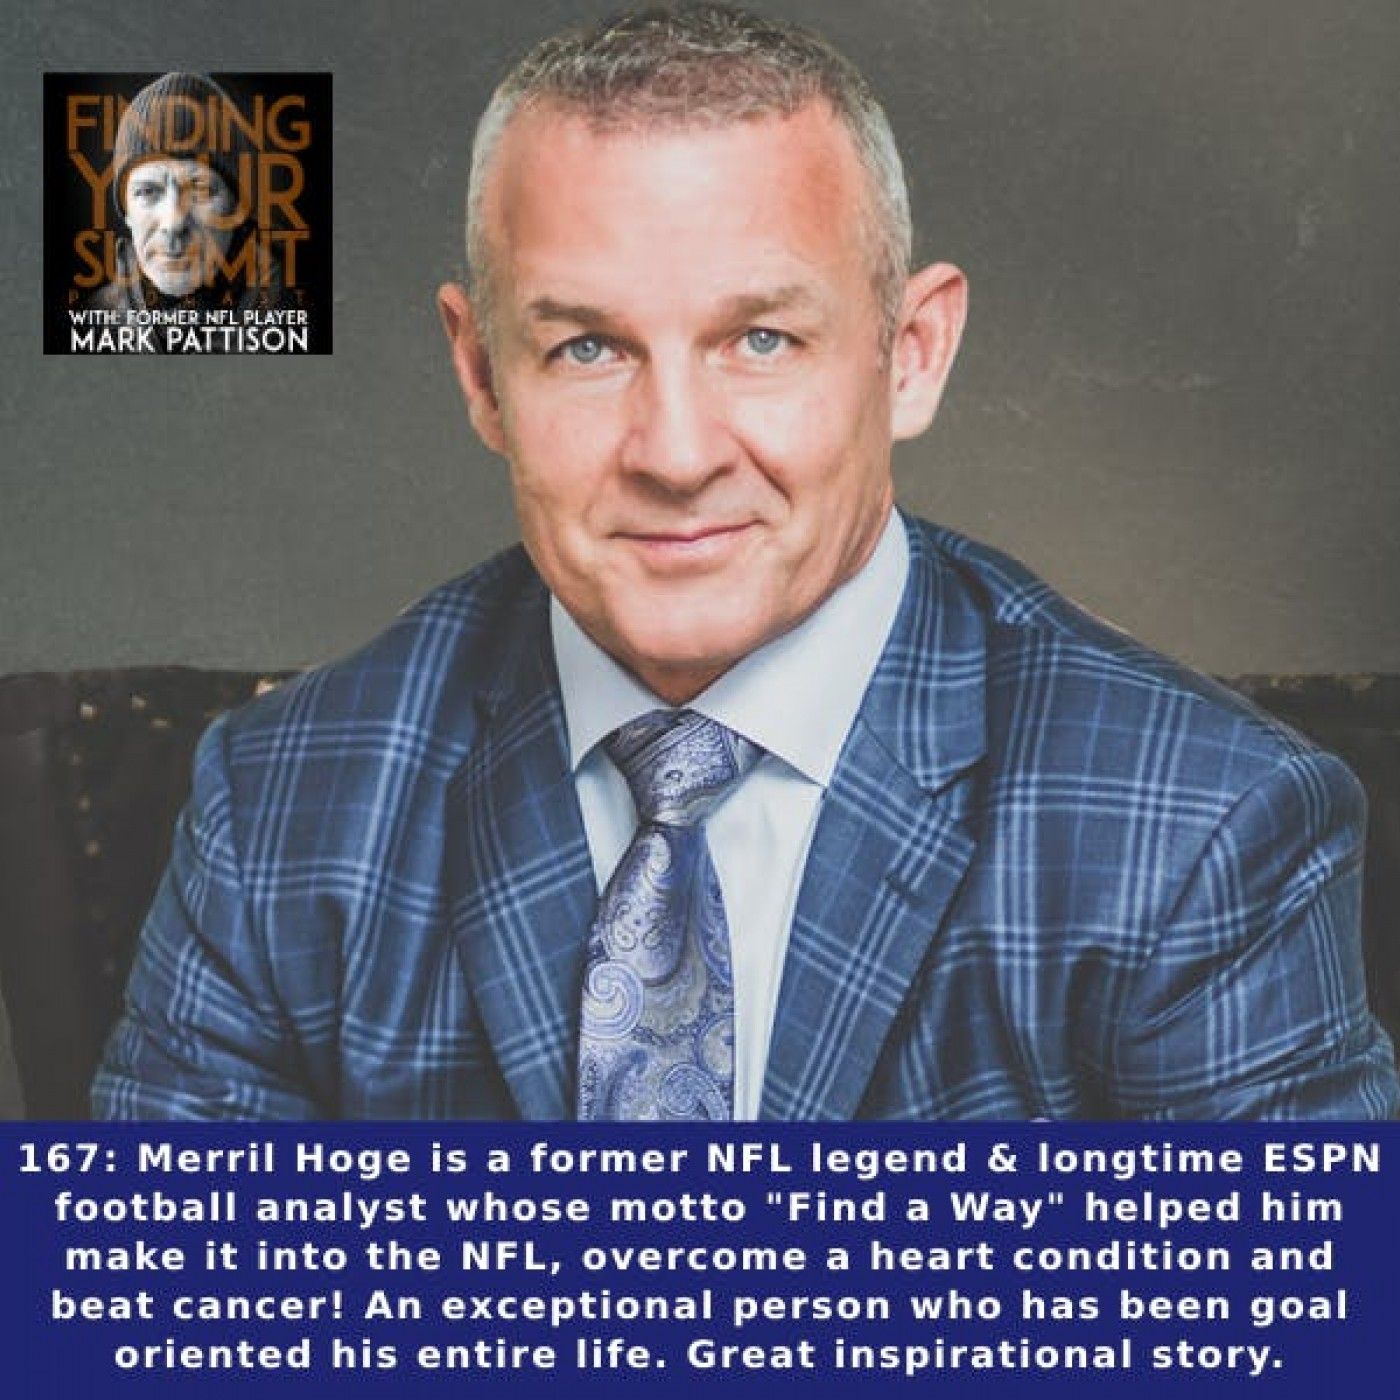 Merril Hoge is a former NFL legend & longtime ESPN football analyst whose motto ”Find a Way” helped him make it into the NFL, overcome a hea